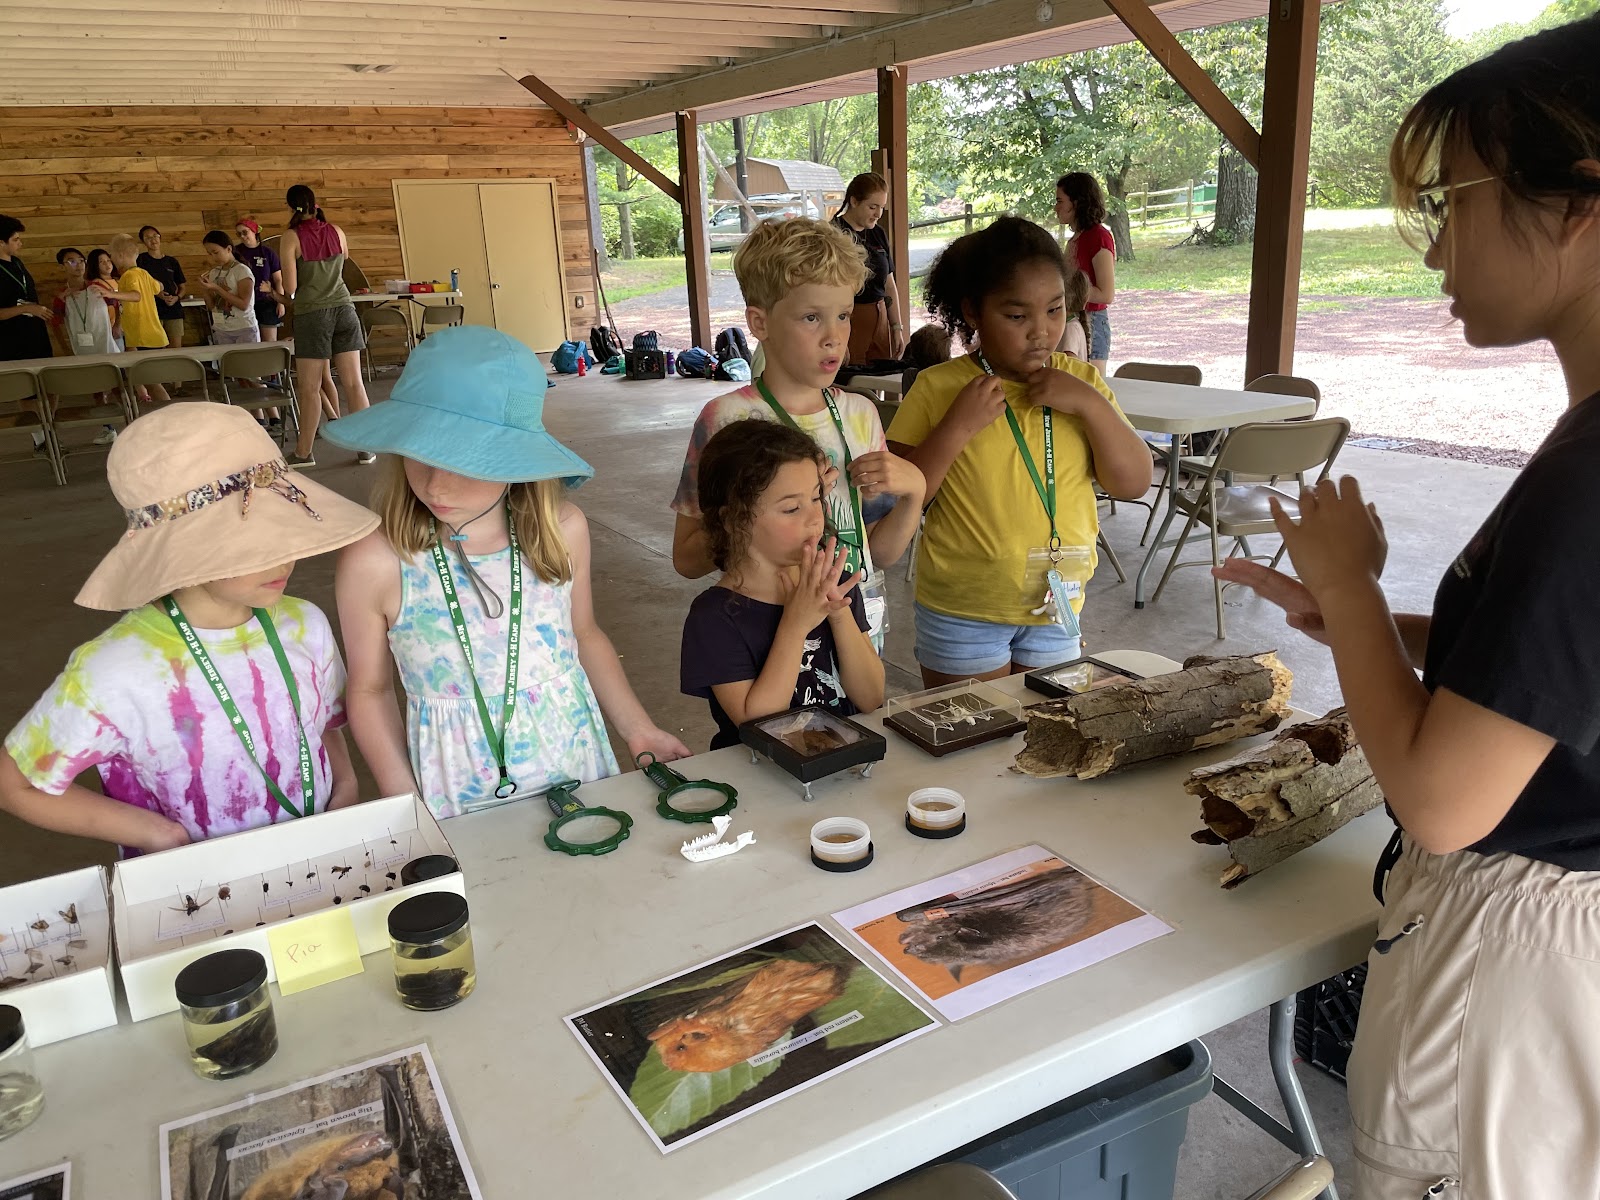 4-H Camp at Rutgers Gardens provides hands-on learning to youth ages 6-14.